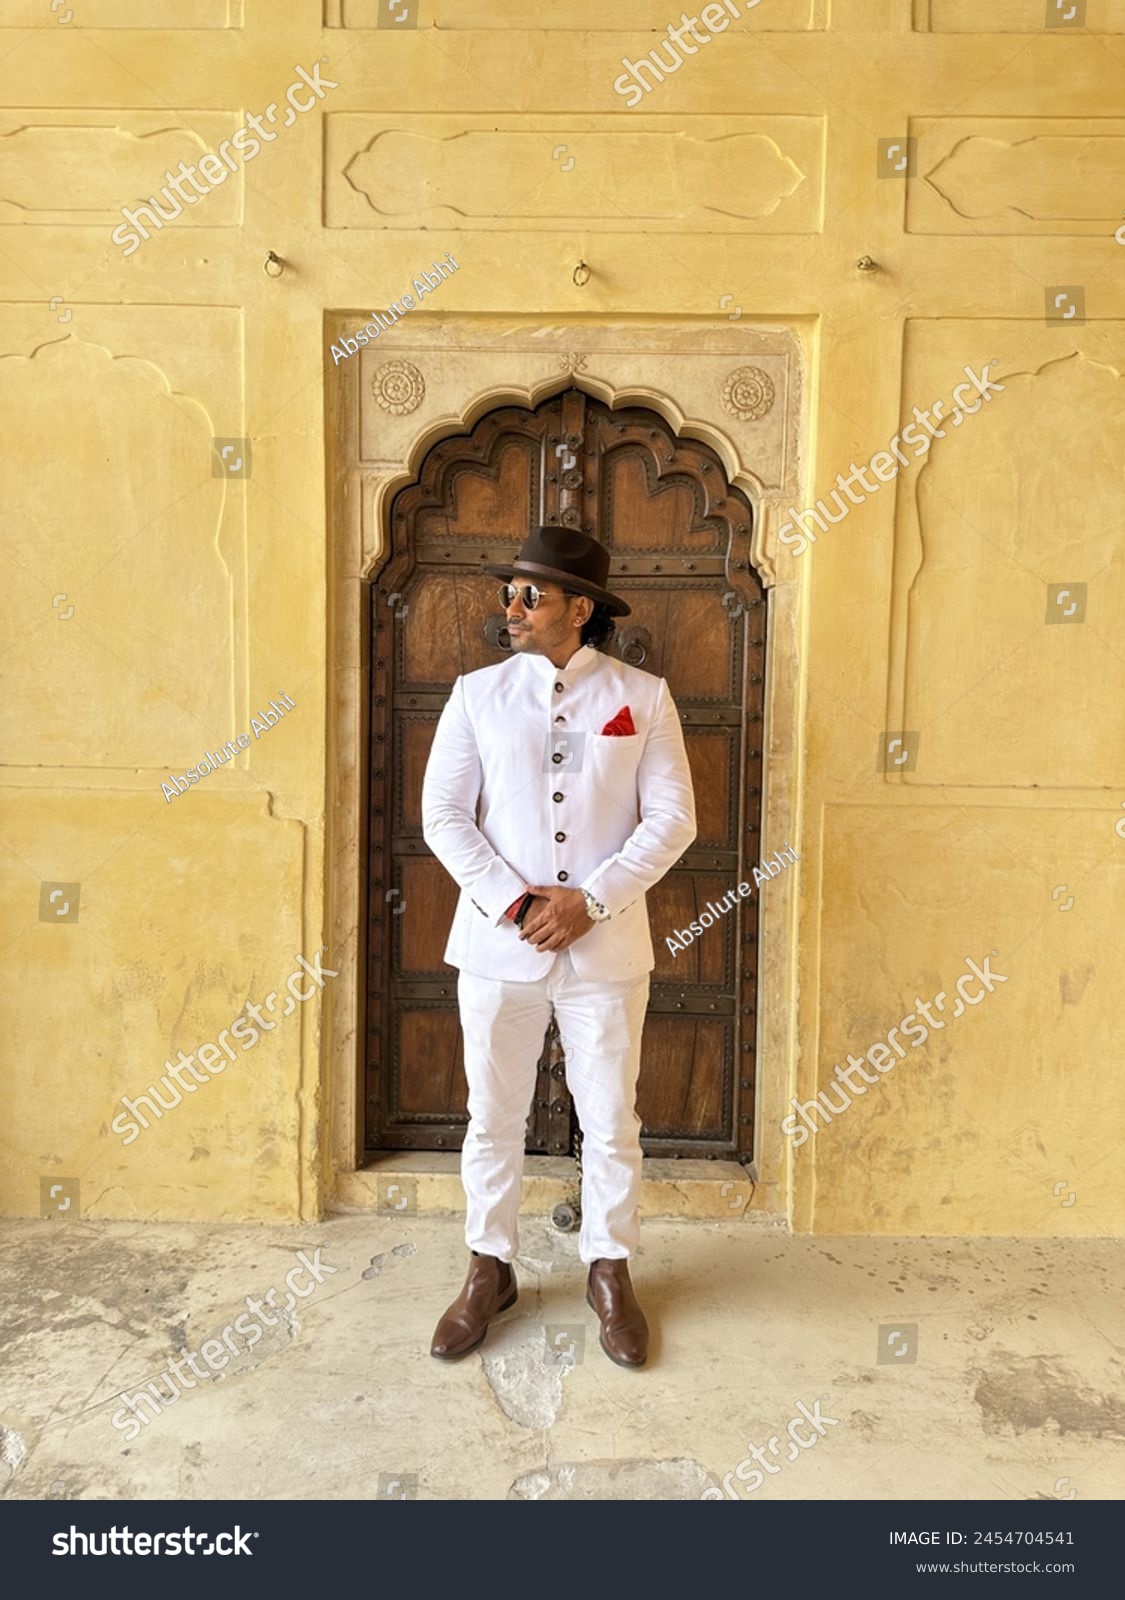 graceful man showcases cultural elegance in traditional attire, exuding confidence and heritage in a single pose #2454704541